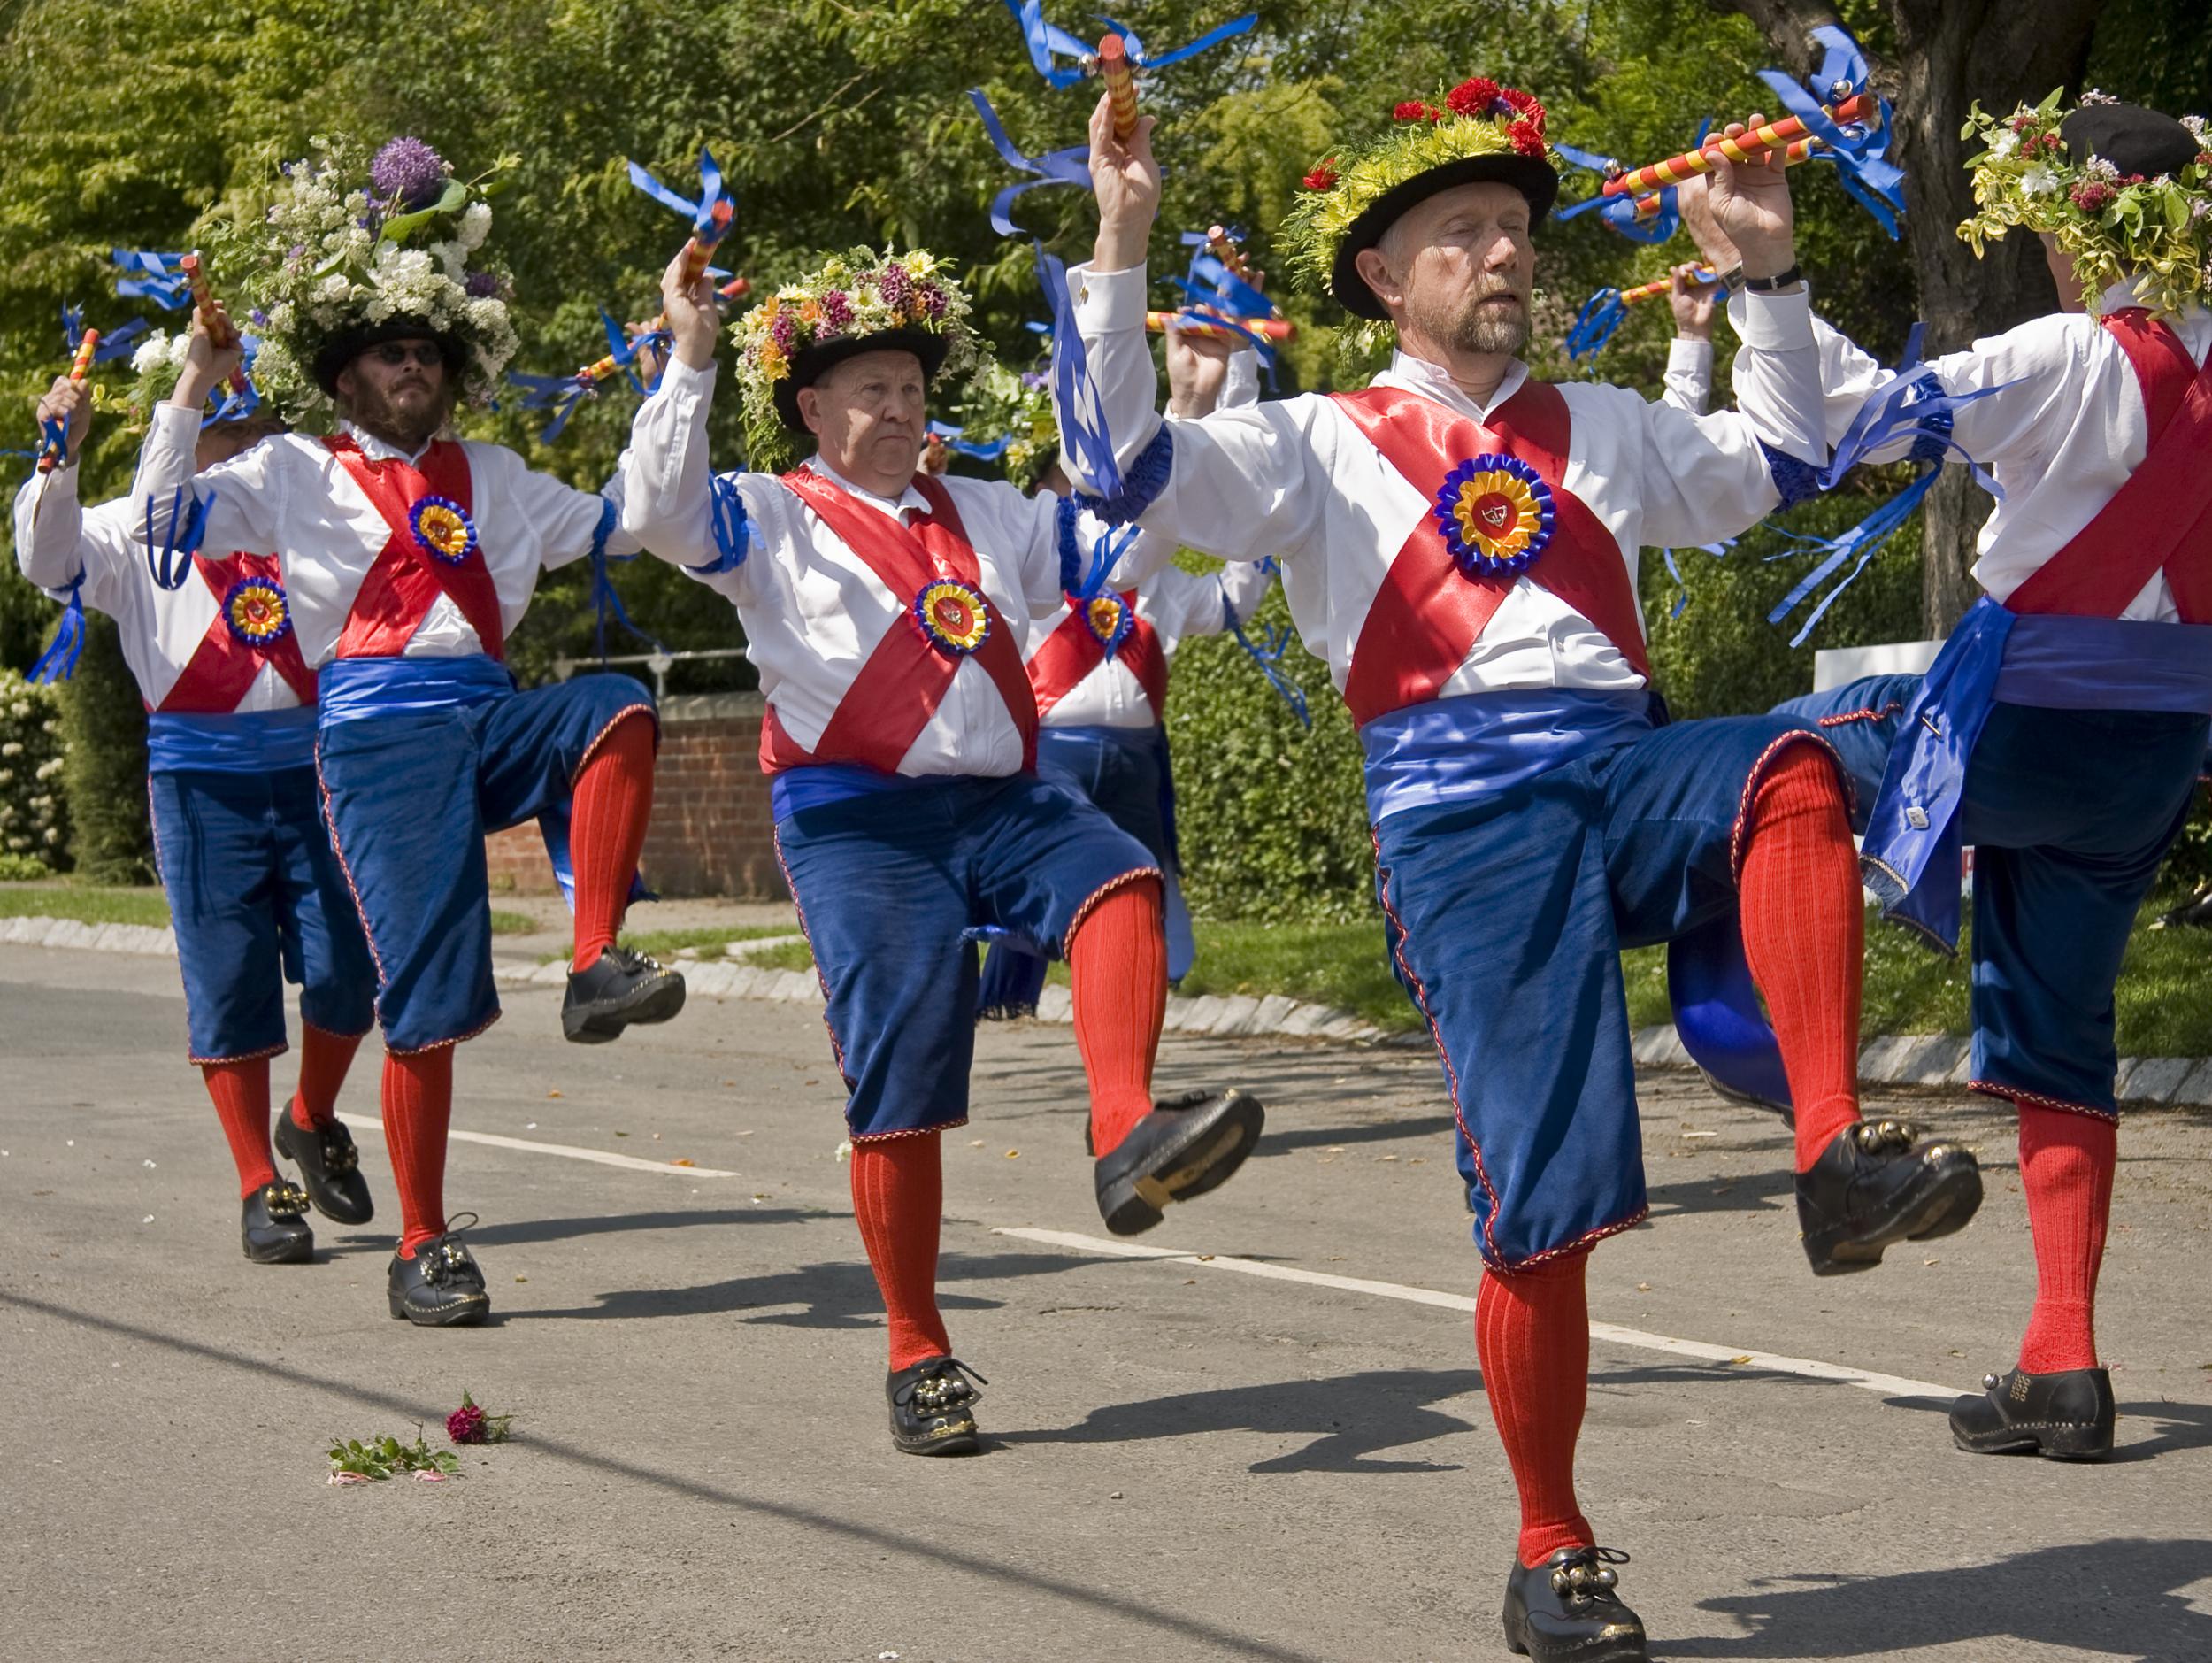 Perhaps with morris dancing it’s best not to think too much about why